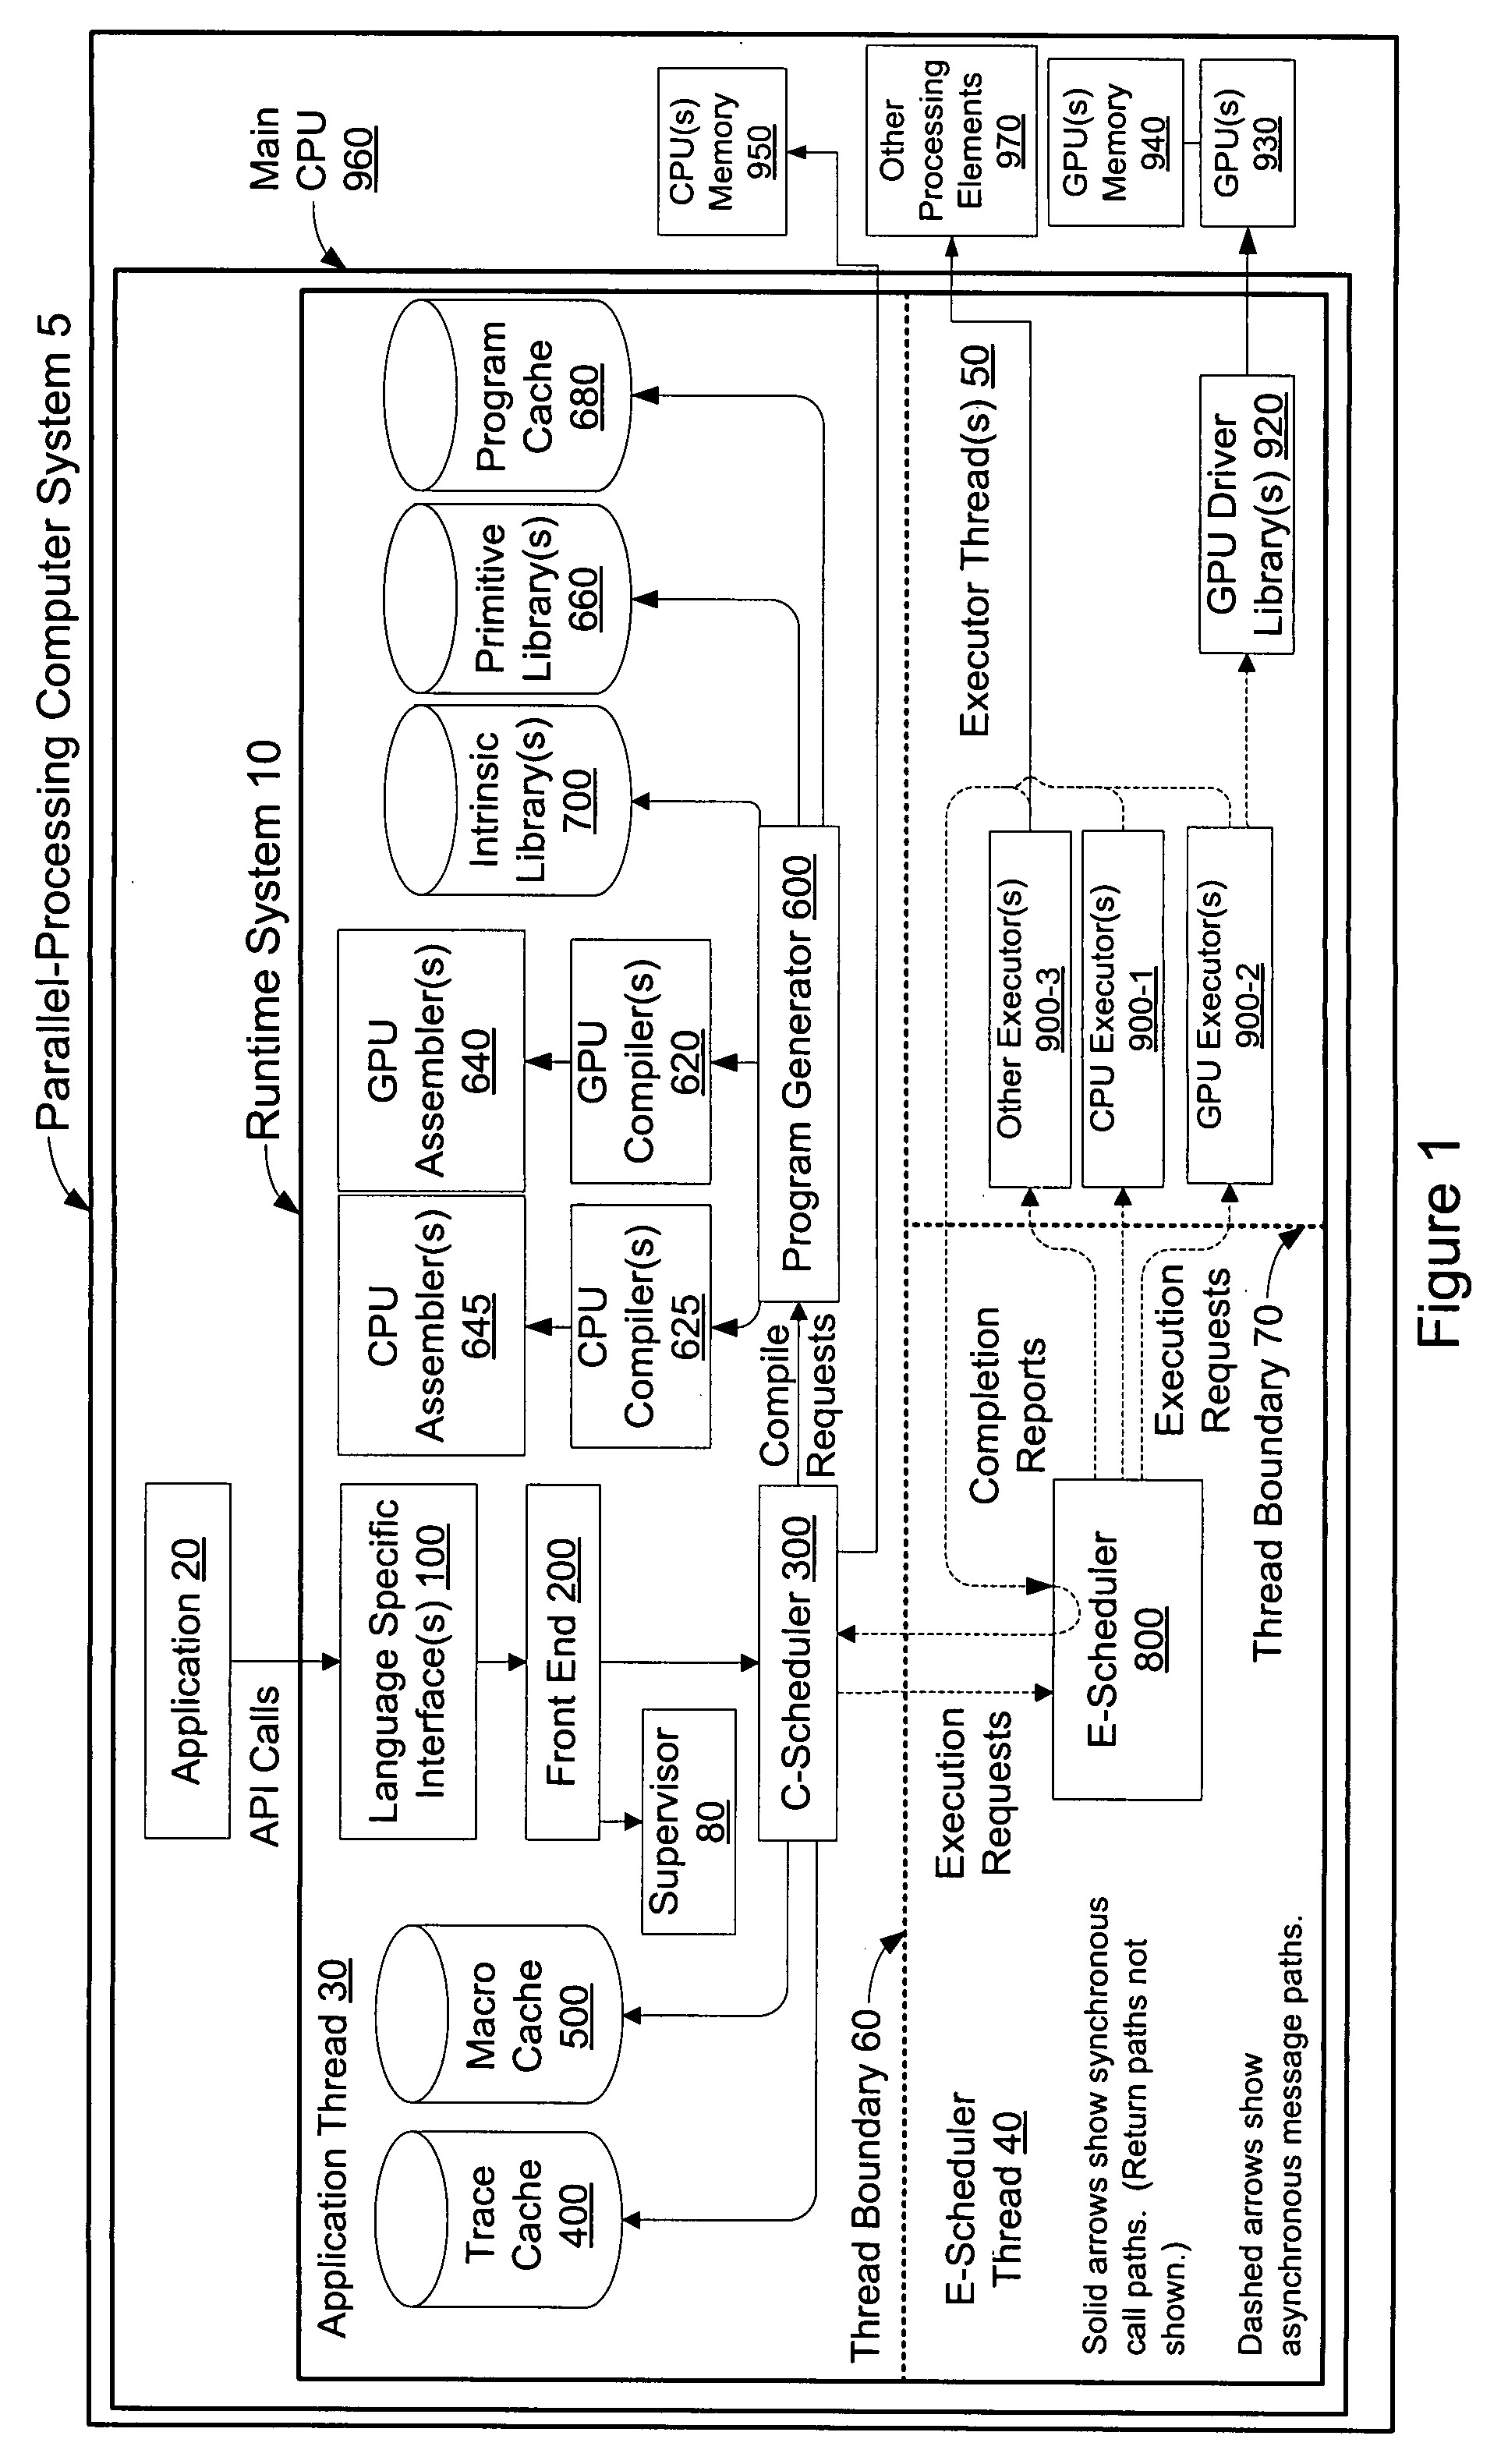 Systems and methods for caching compute kernels for an application running on a parallel-processing computer system